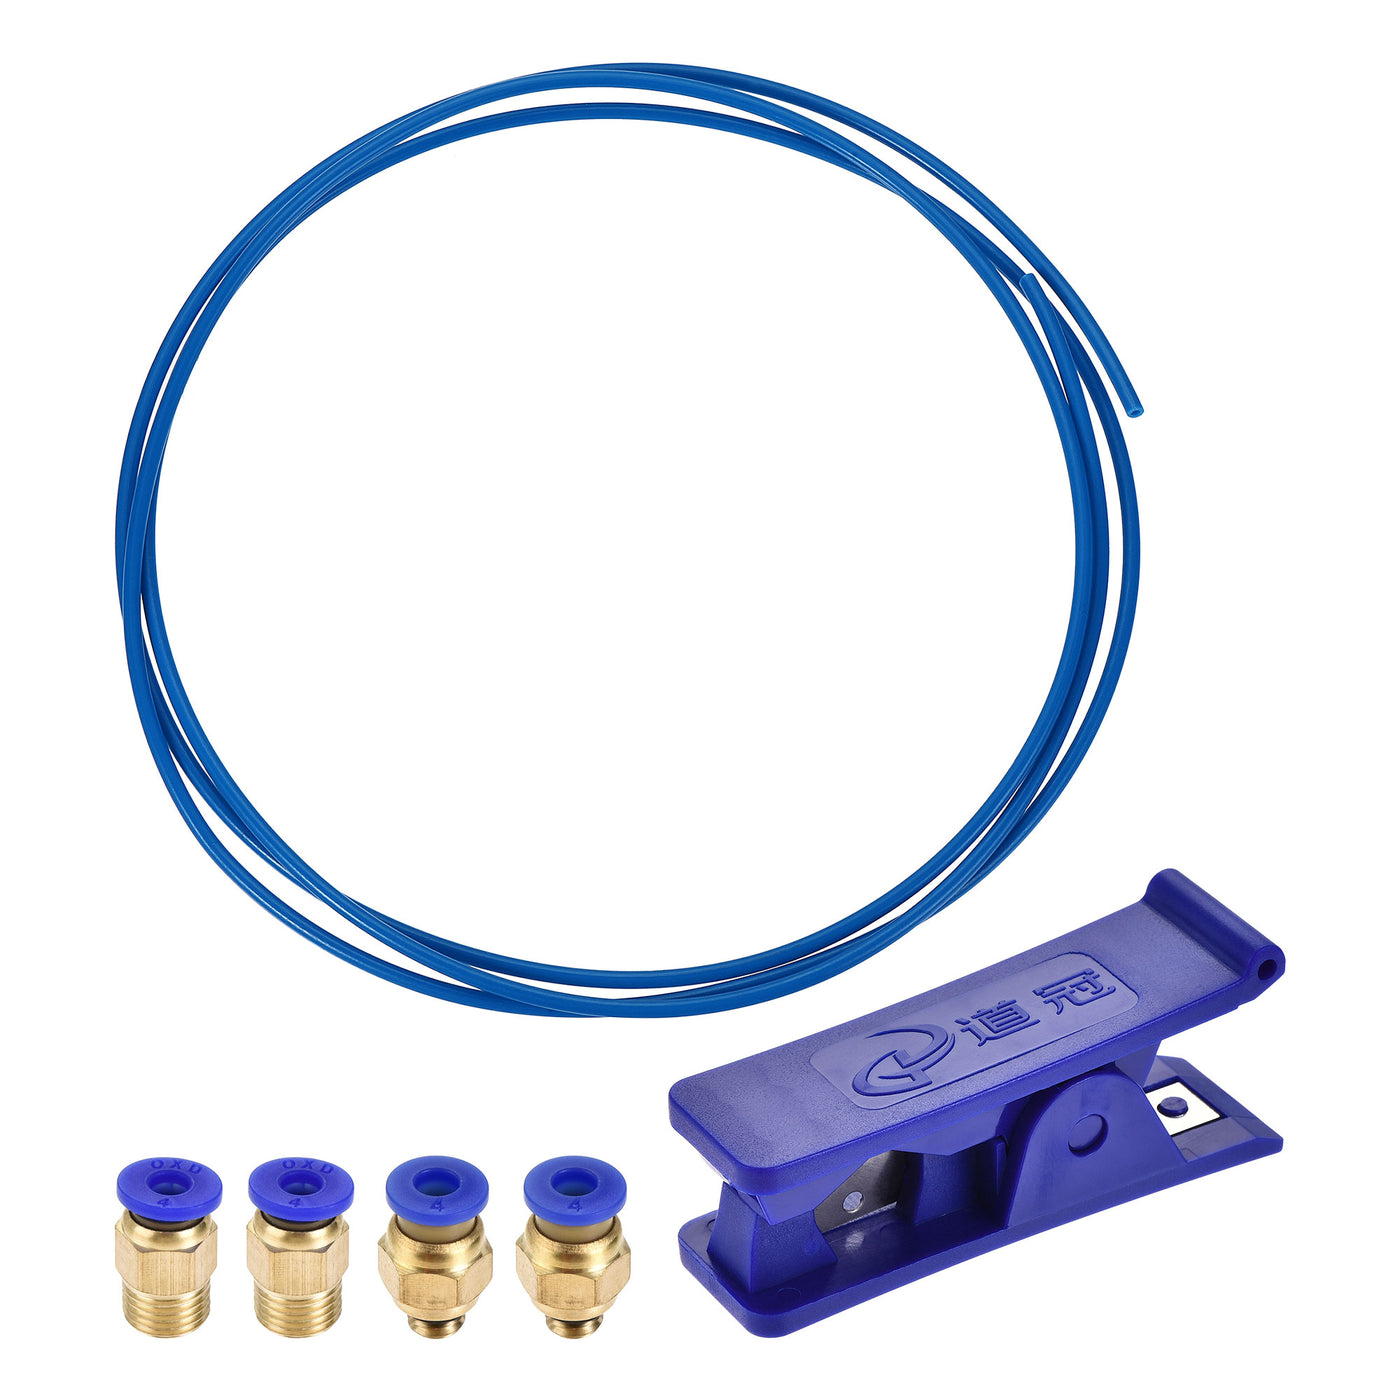 uxcell Uxcell Pneumatic PTFE Air Tubing Hose Kit 4mm OD 2M Length Blue with Tube Cutter and M6 M10 Fittings